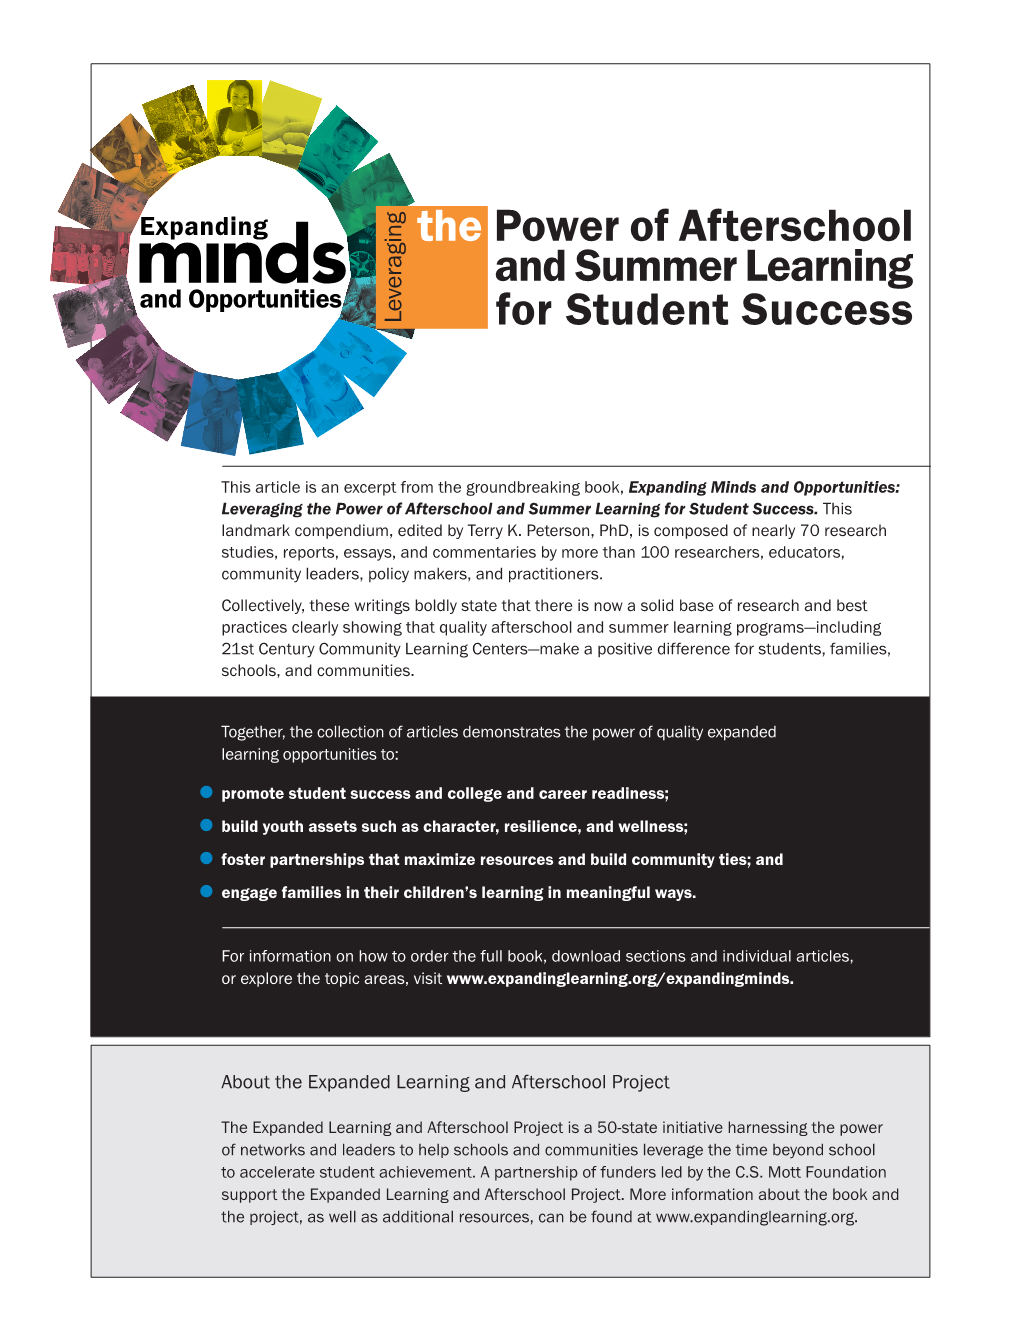 The Potential of Career and College Readiness and Exploration in Afterschool Programs